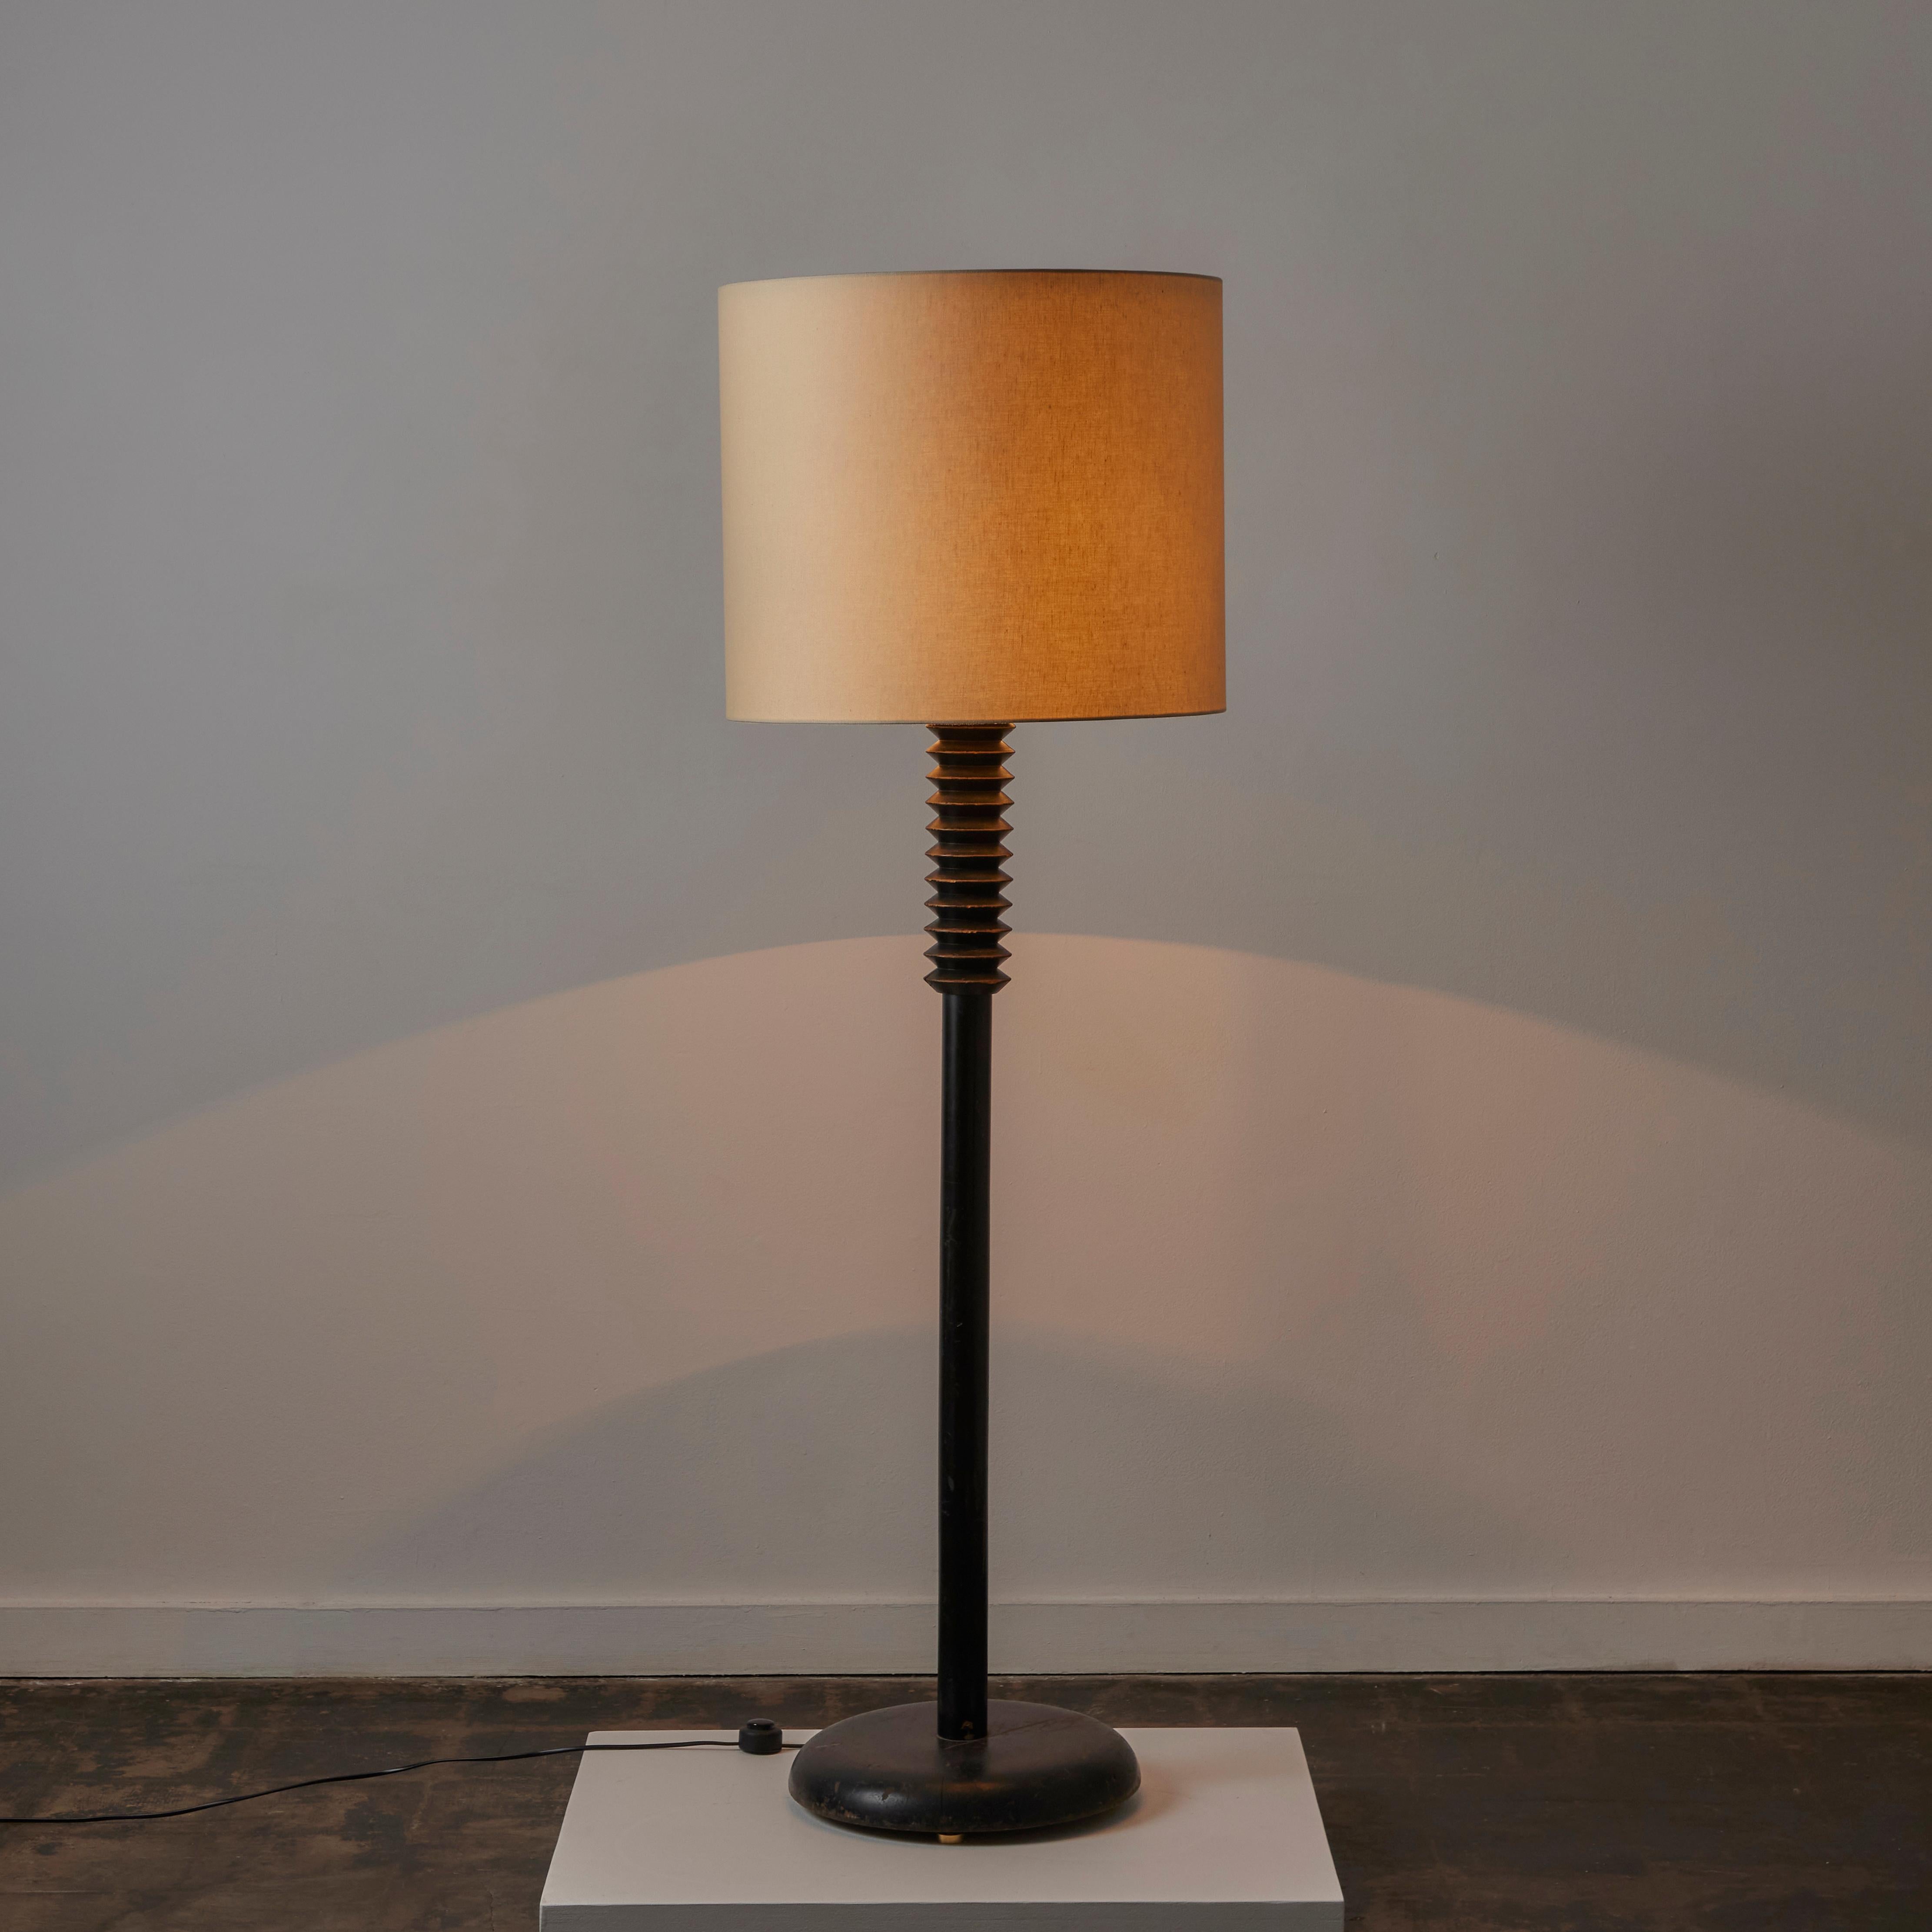 Floor Lamp by Charles Dudouyt. Designed and manufactured in France, circa the 1940s. An ebonized wooden base and stem featuring an upper-turned detail. New linen shade custom-made. The light holds a single E27 socket type, adapted for the US. A Euro